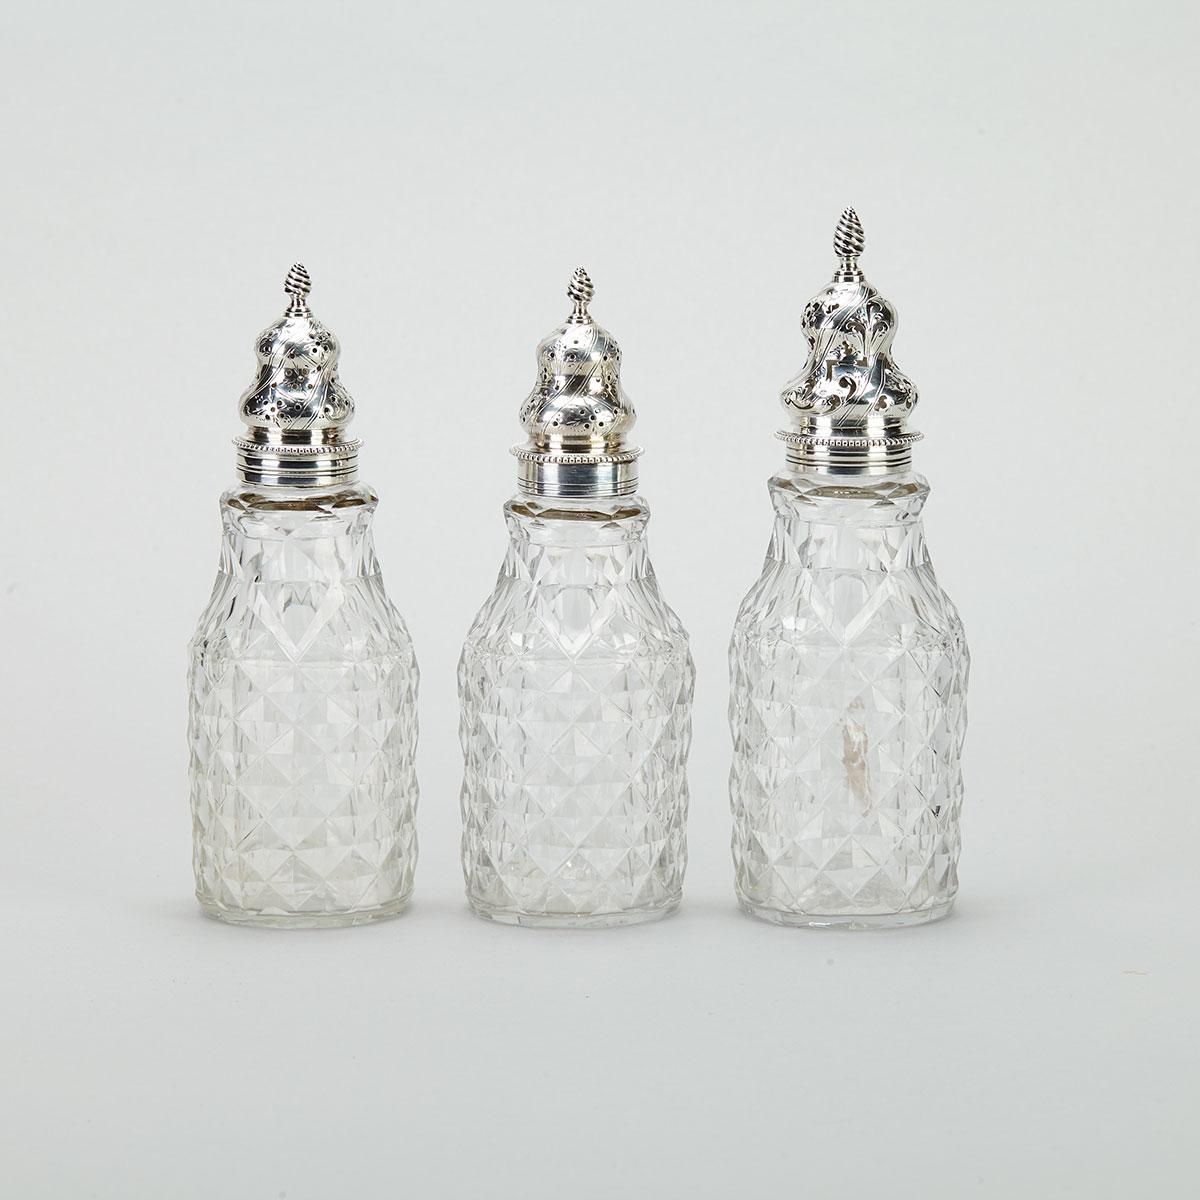 Three George III Silver Mounted Cut Glass Casters, c.1775